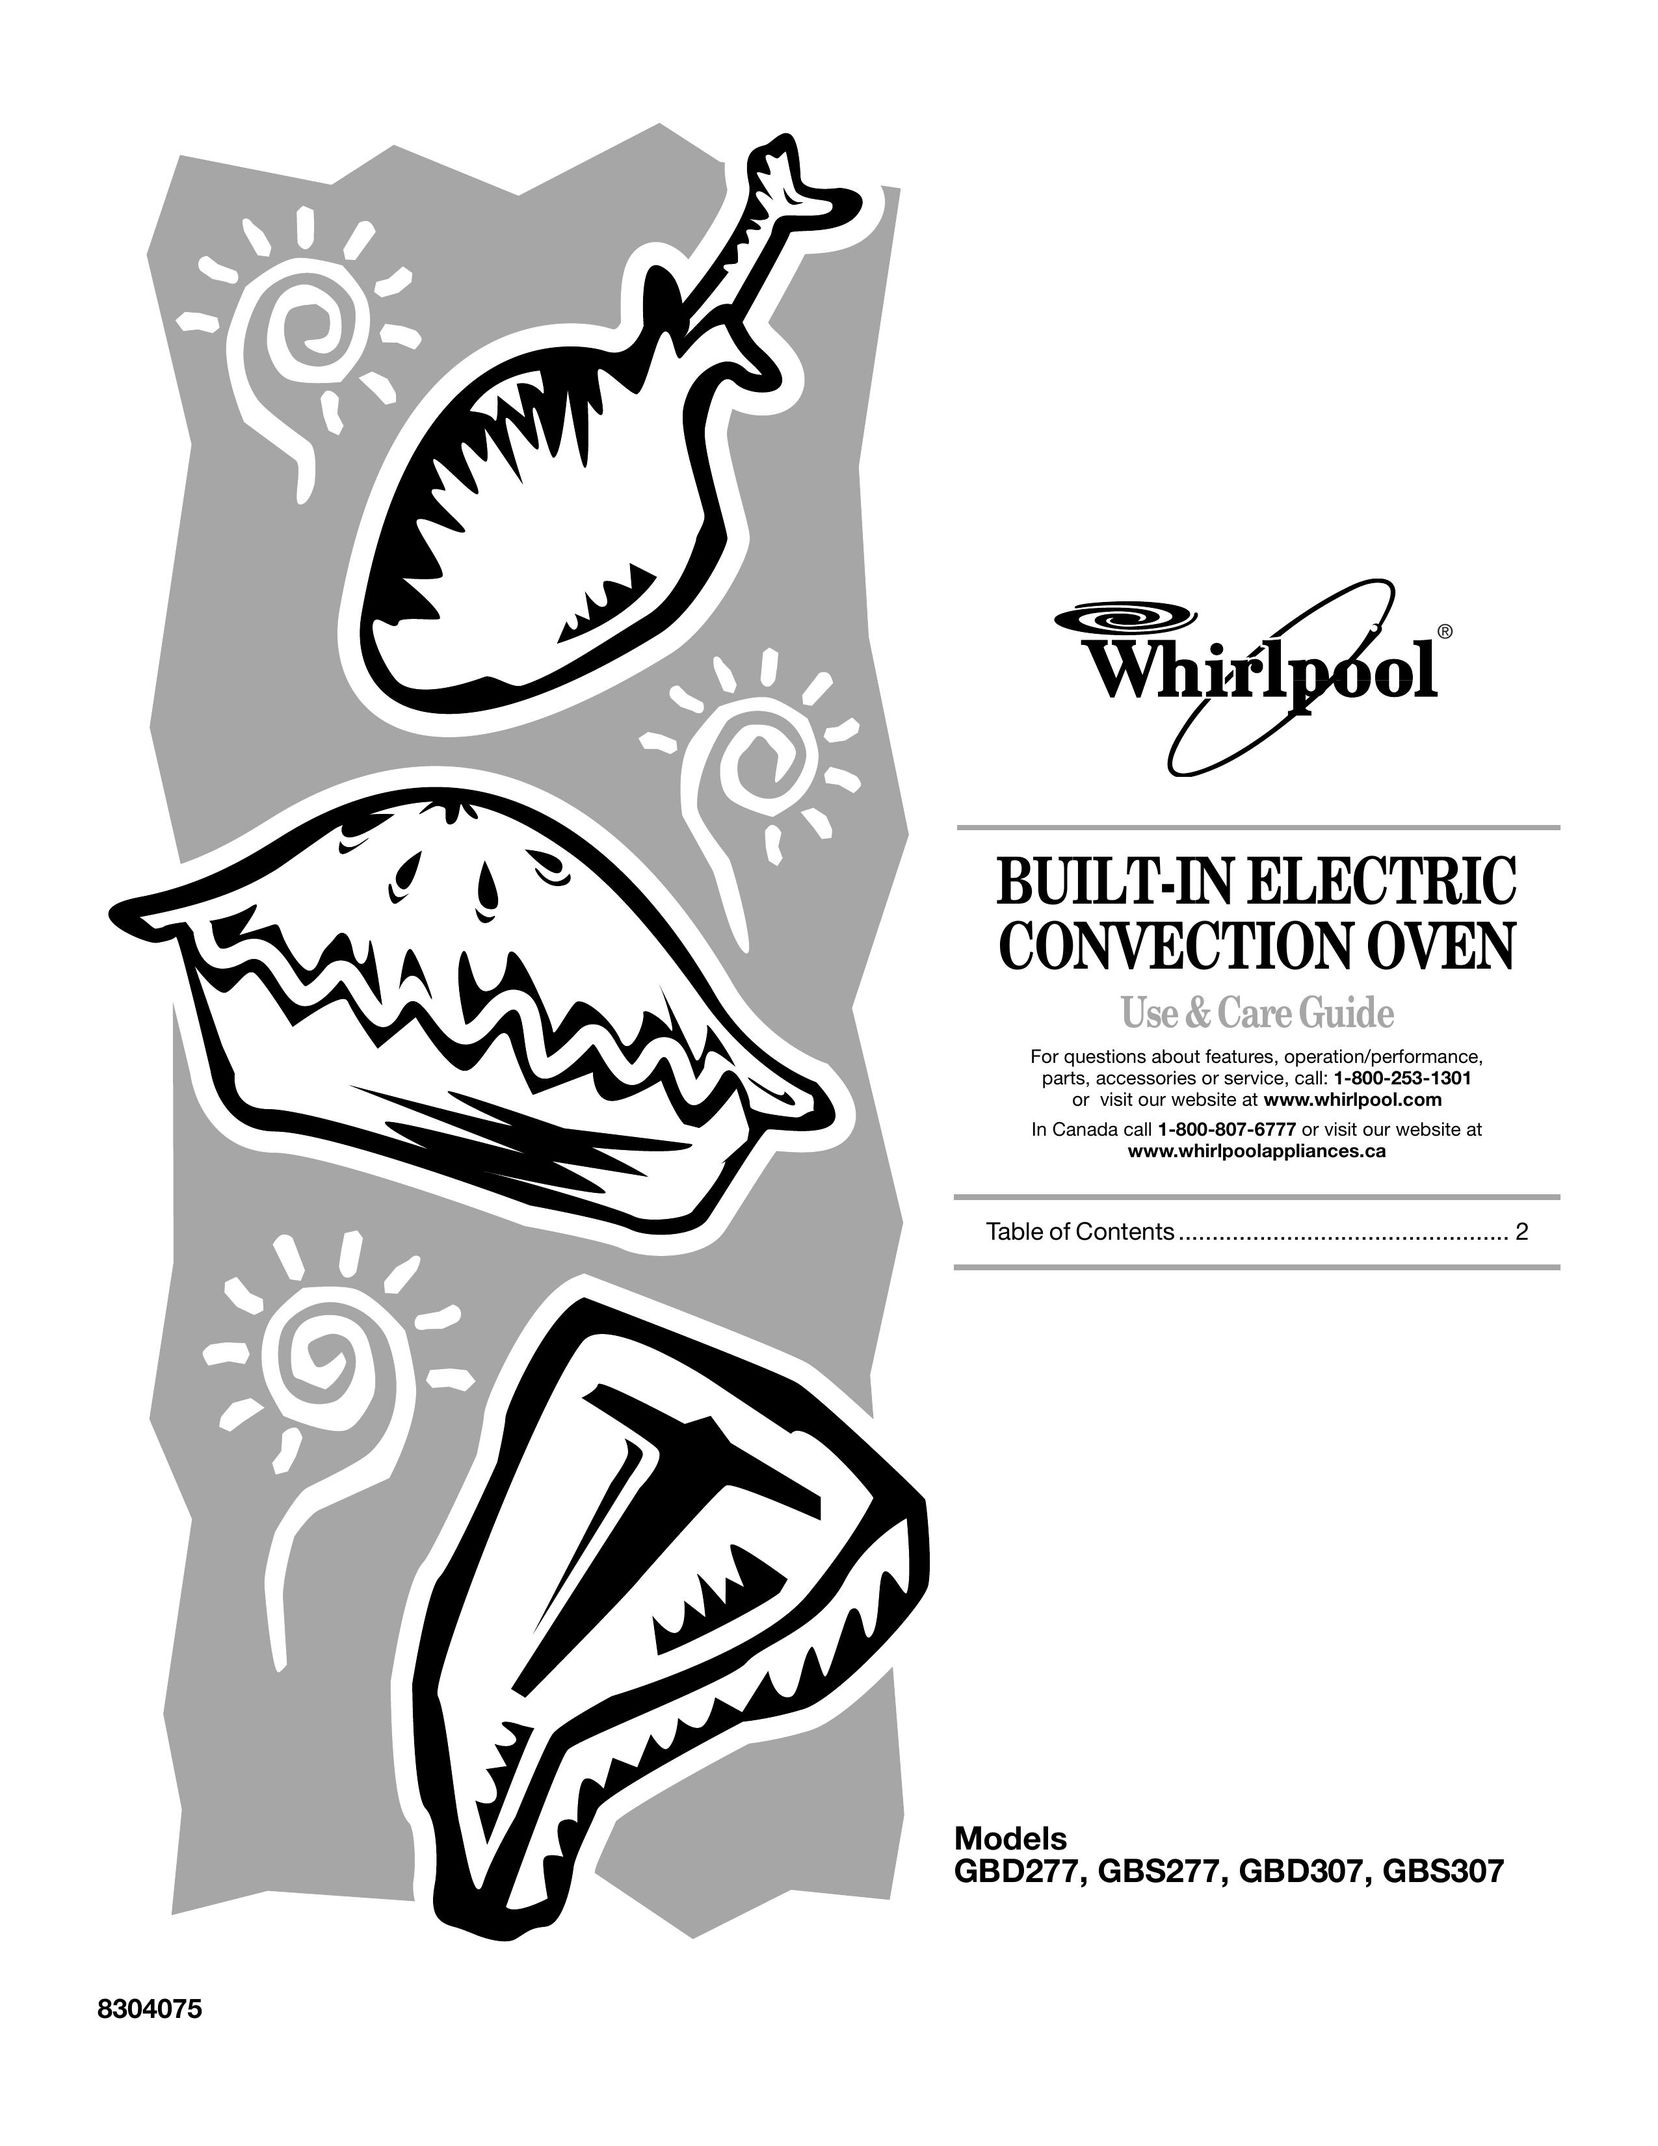 Whirlpool GBD307 Convection Oven User Manual